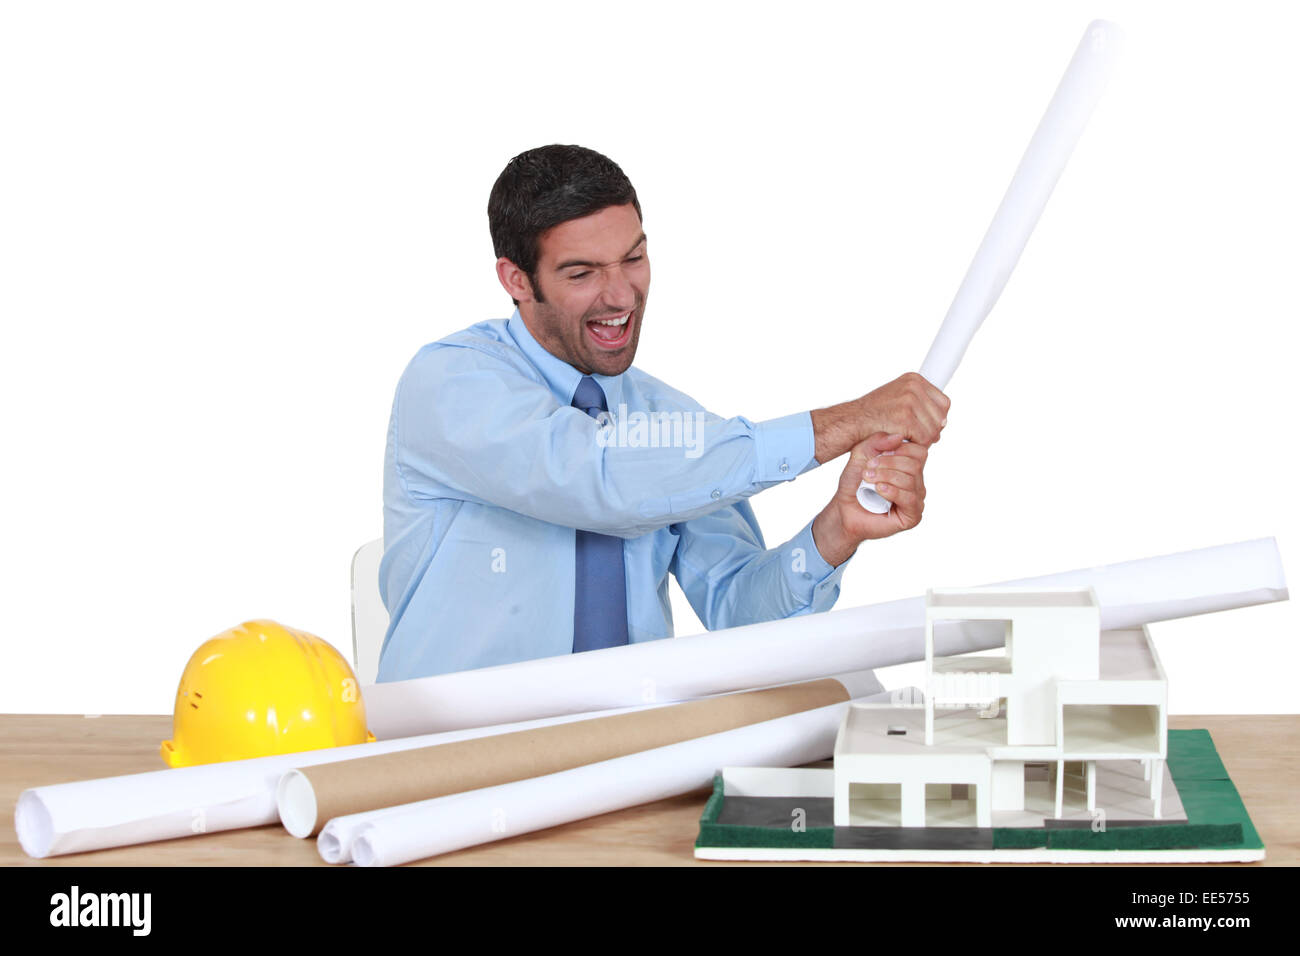 Man about to destroy a building model Stock Photo